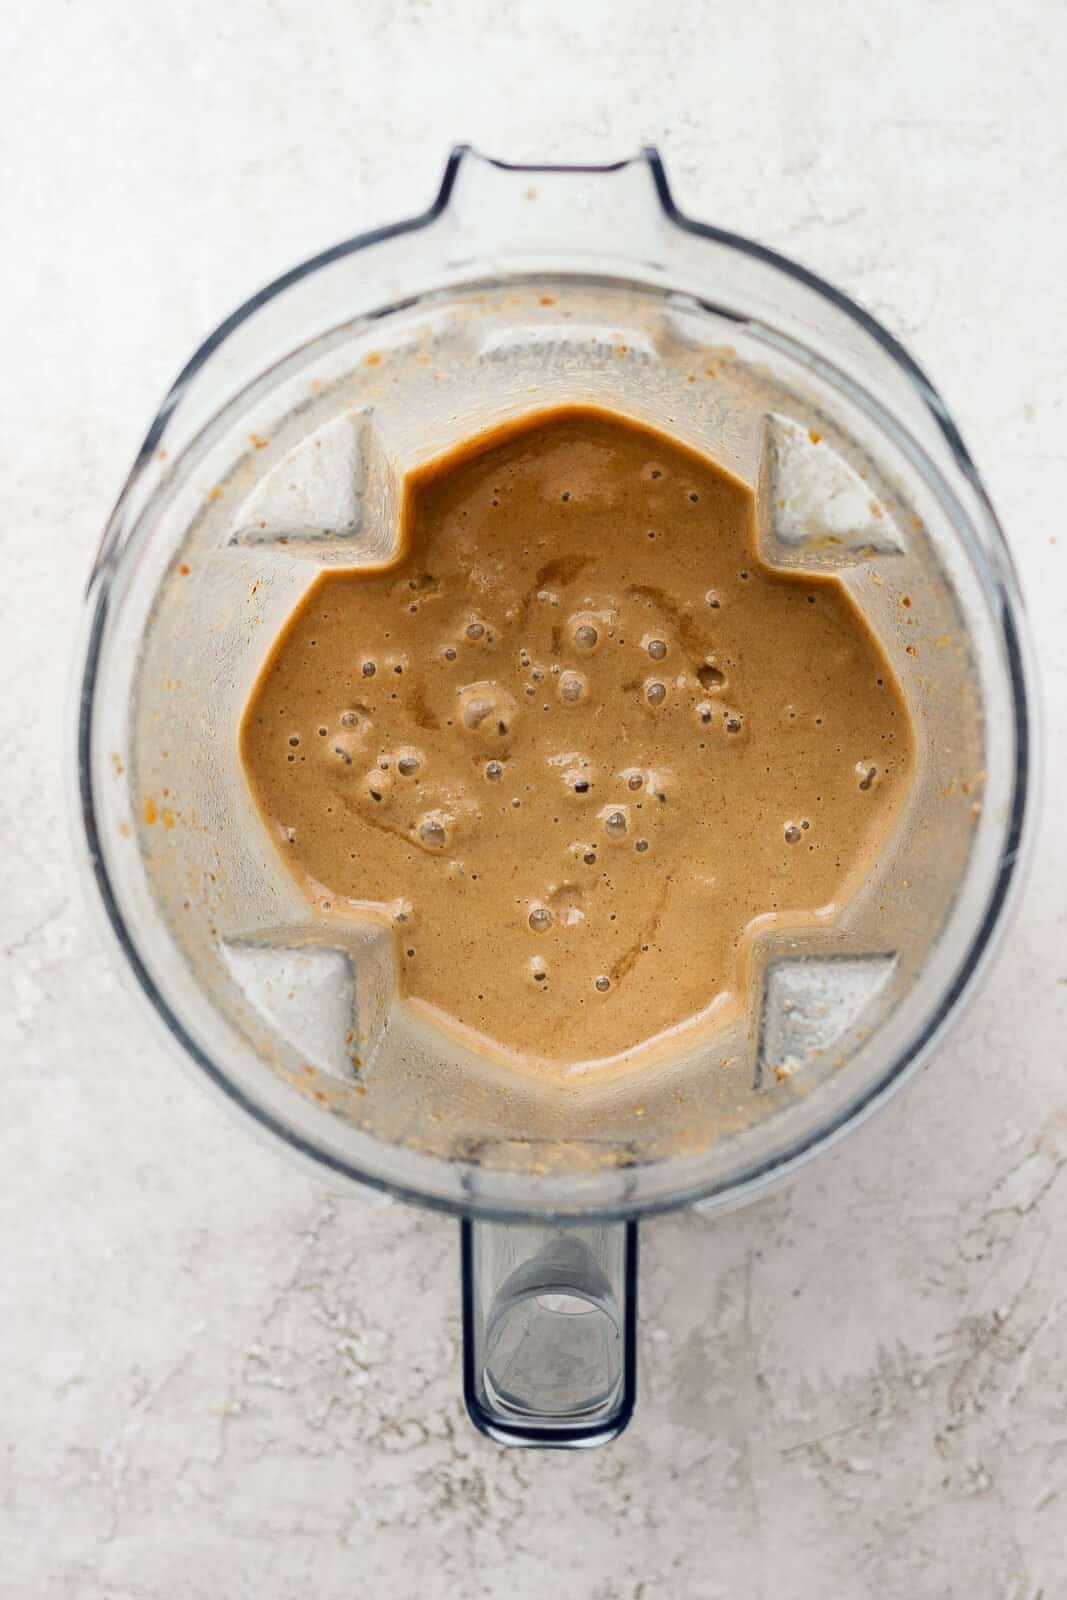 A coffee smoothie all blended up in a blender.